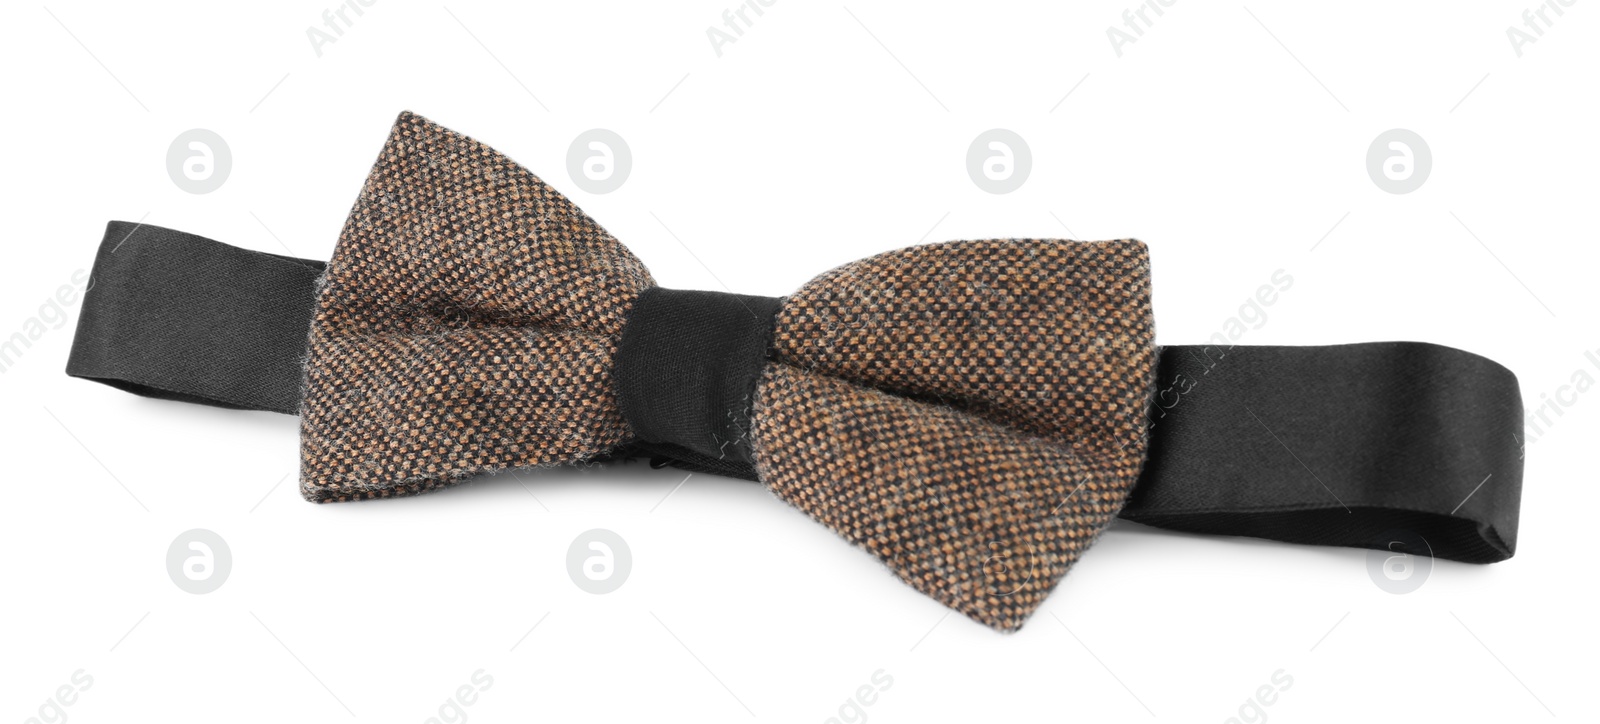 Photo of Stylish brown bow tie isolated on white